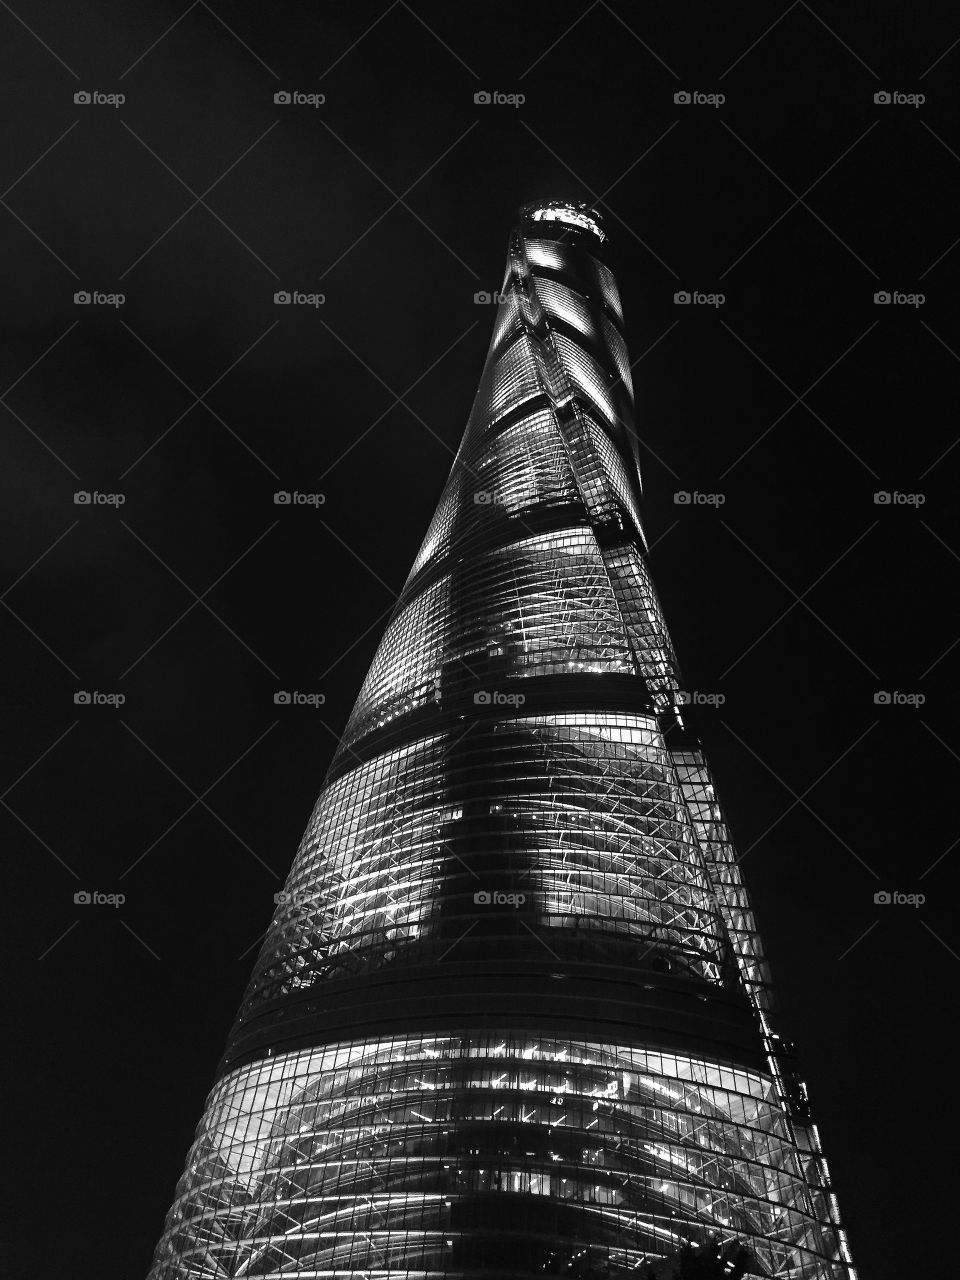 Shanghai Tower, tallest building in China